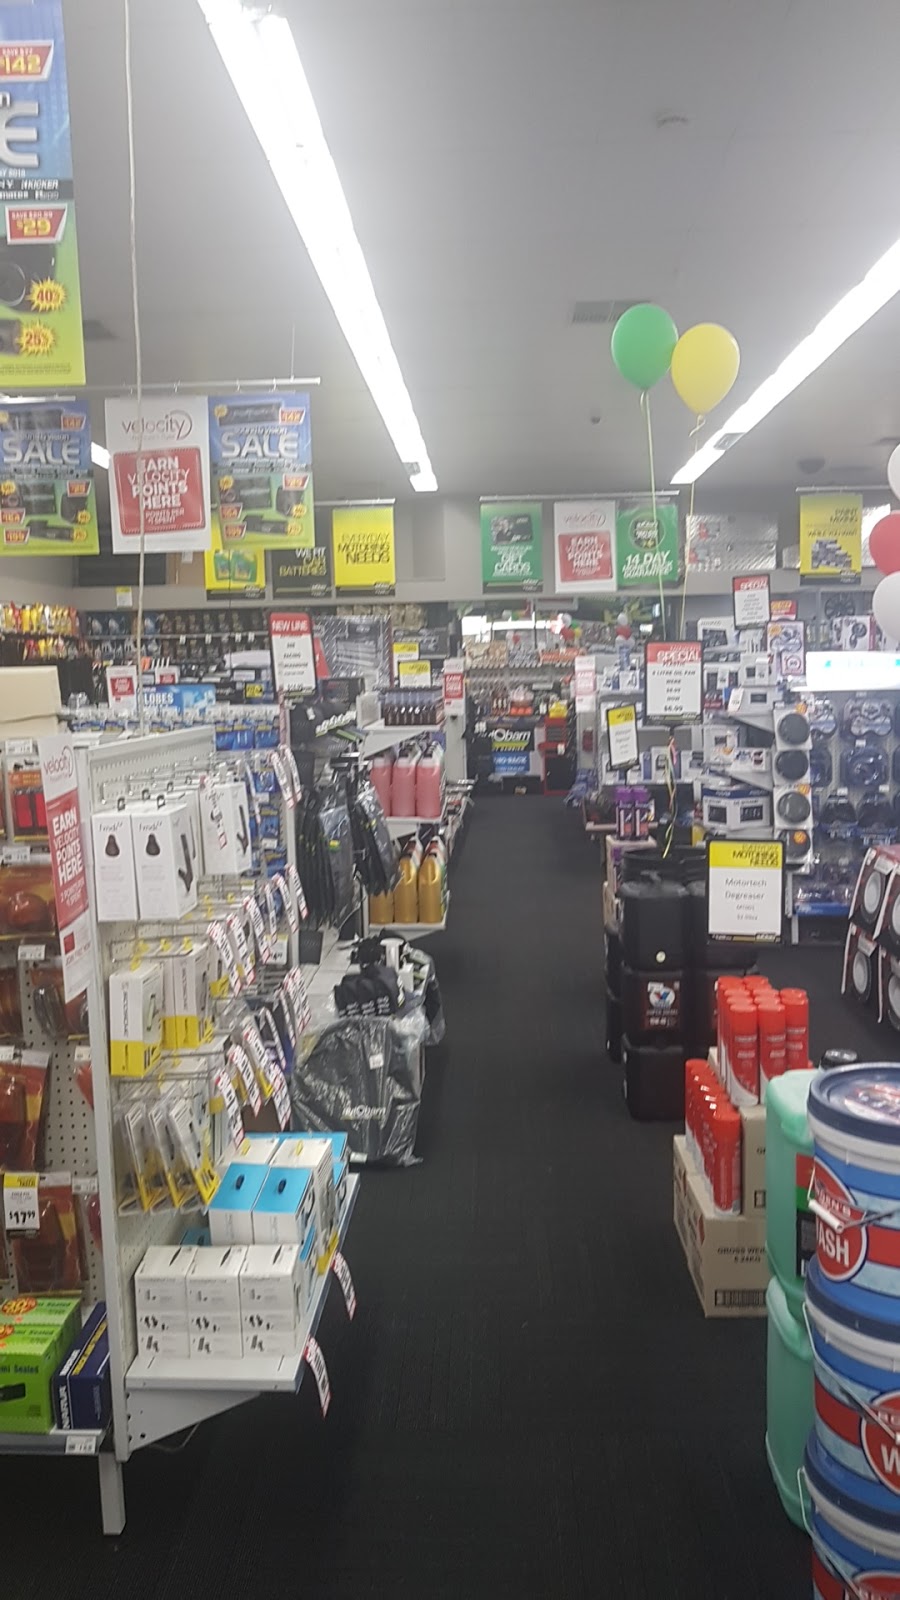 Autobarn Mt Gambier | electronics store | 92 Commercial St W, Mount Gambier SA 5290, Australia | 0887210100 OR +61 8 8721 0100